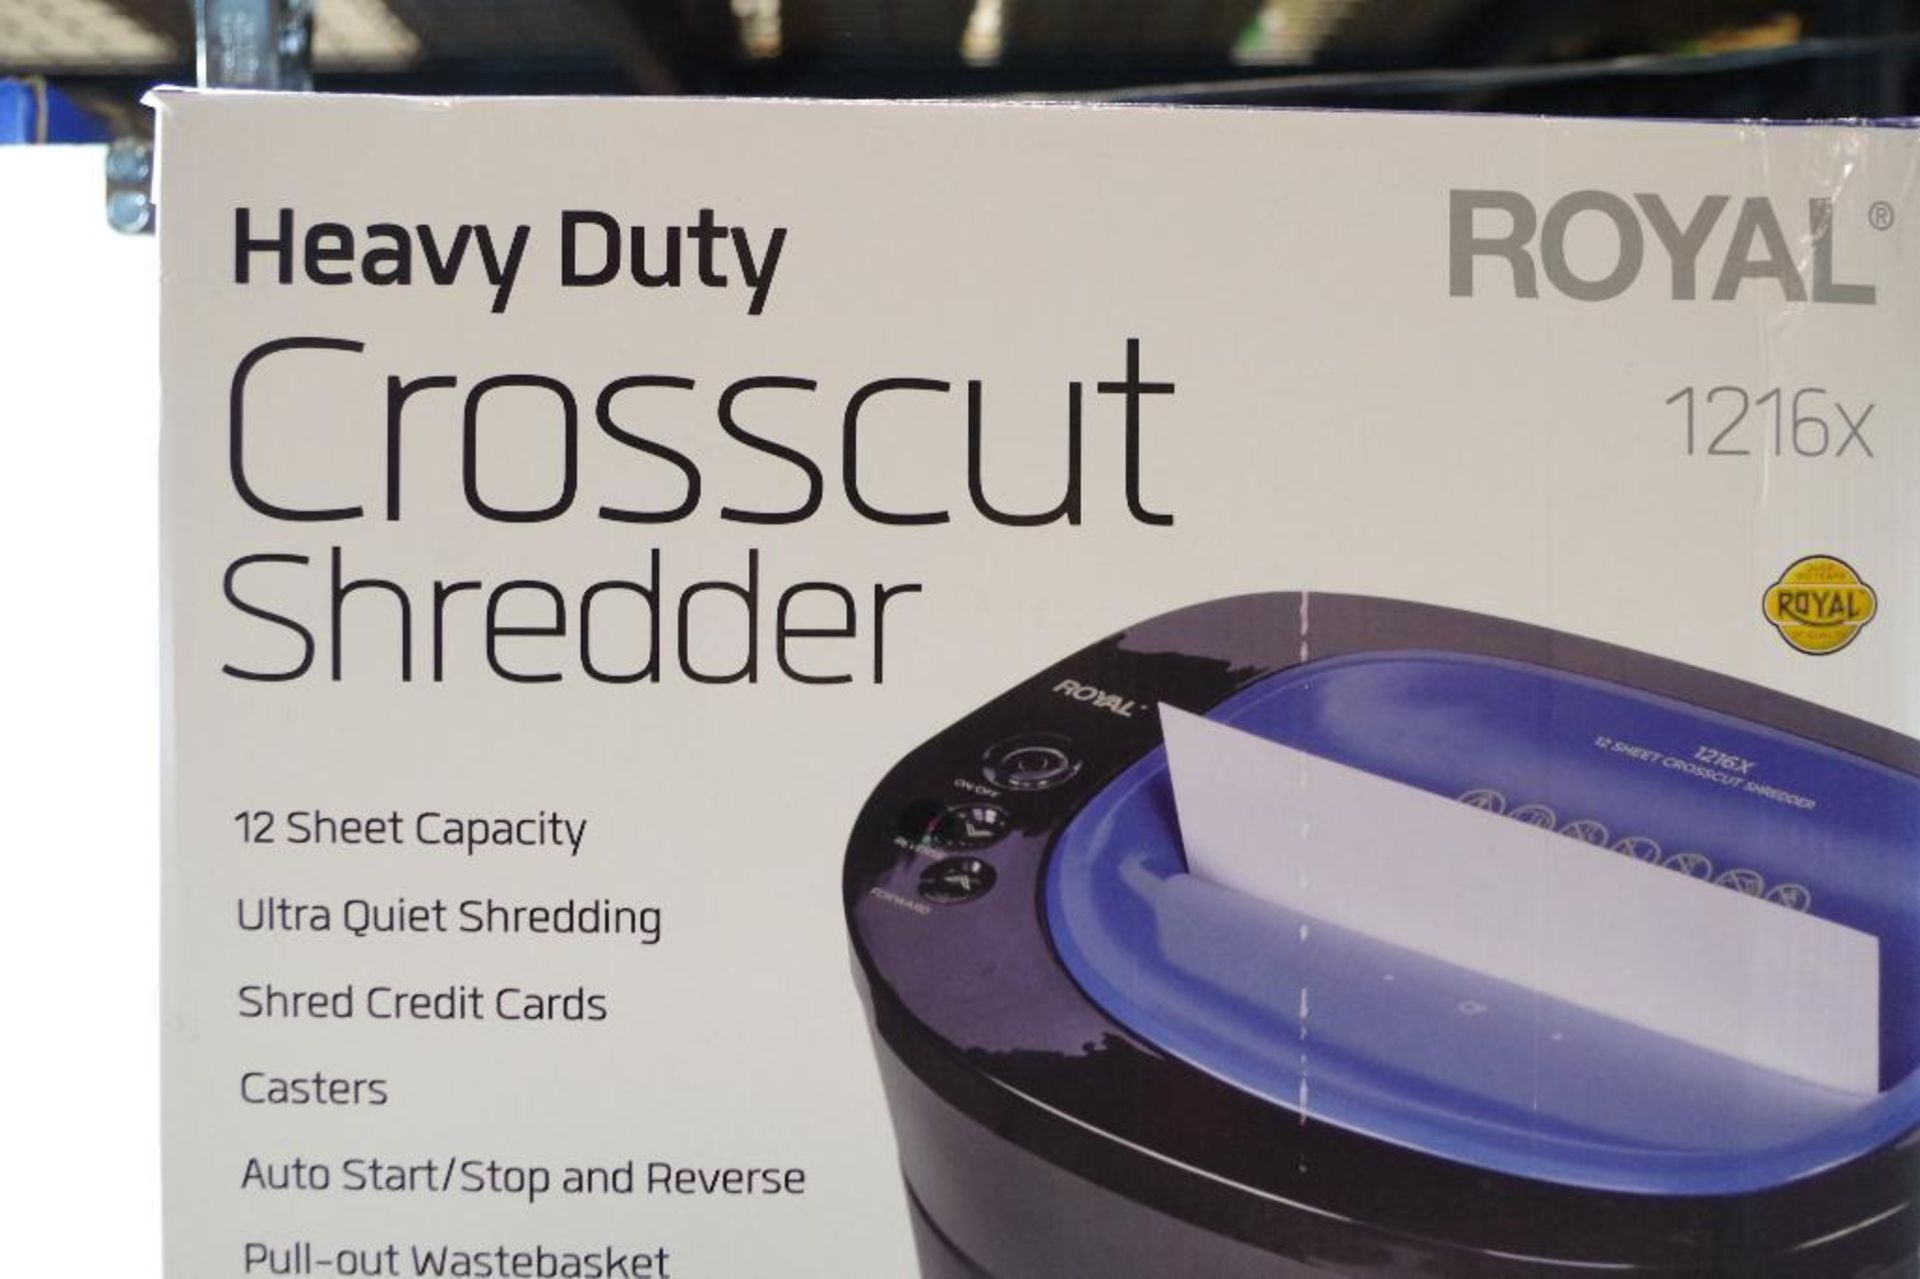 ROYAL Heavy Duty Crosscut Shredder (Store Return, Condition Unknown) - Image 2 of 2